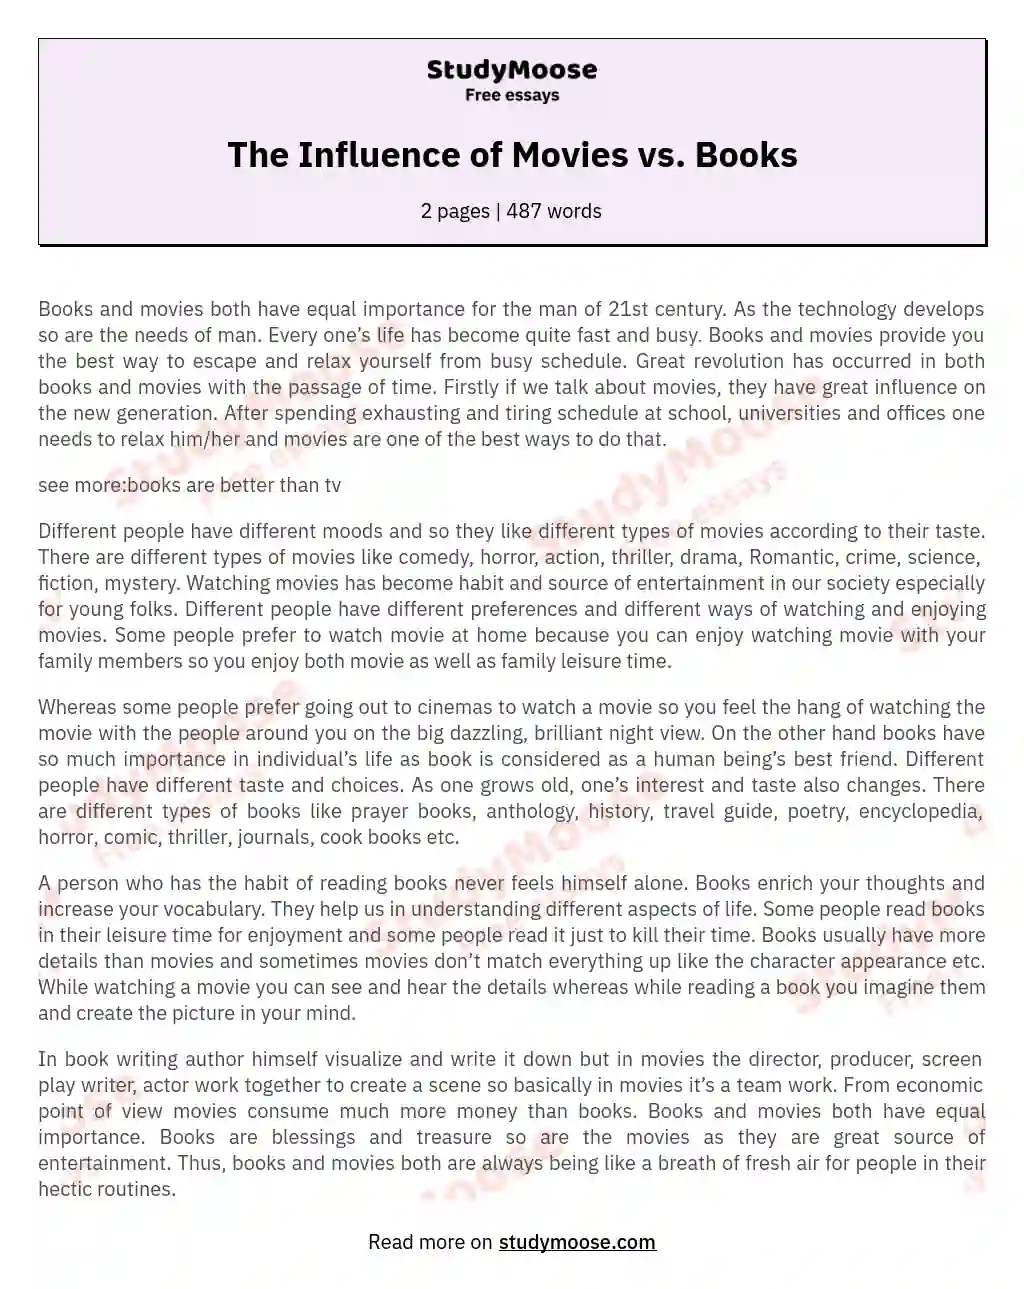 The Influence of Movies vs. Books essay